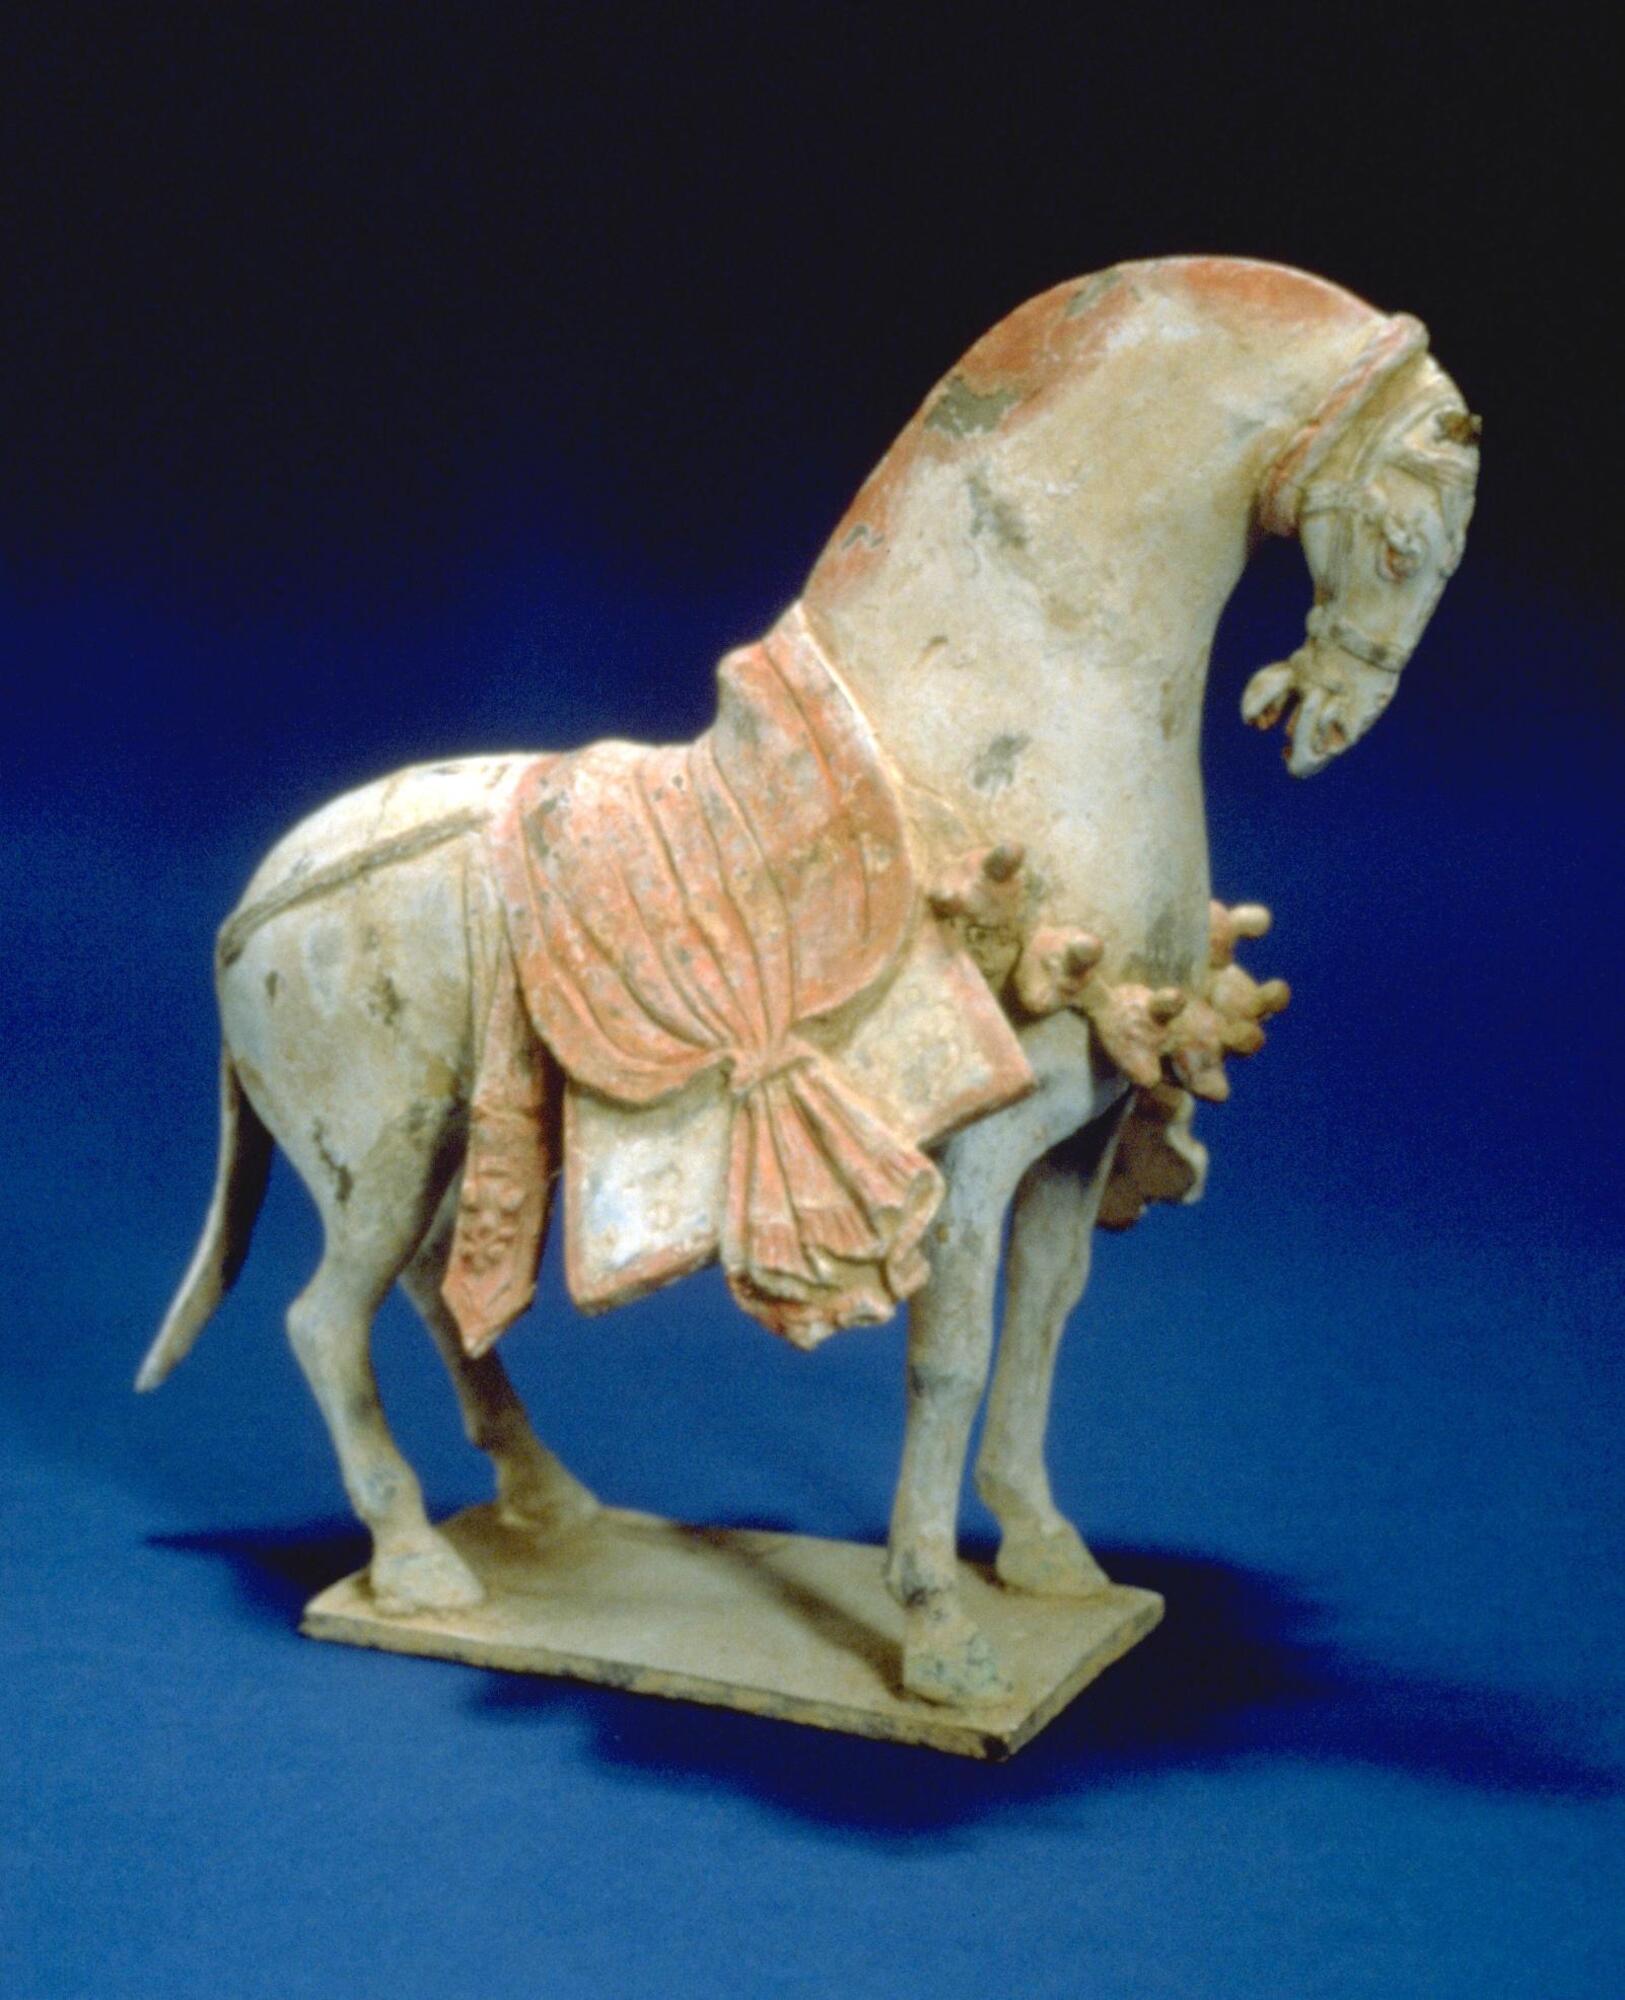 Ceramic figure of a horse standing on a thin ceramic base, which a high-arched neck and a vertical head; large saddle with tassels; traces of orange-ochre, pink red and white pigments